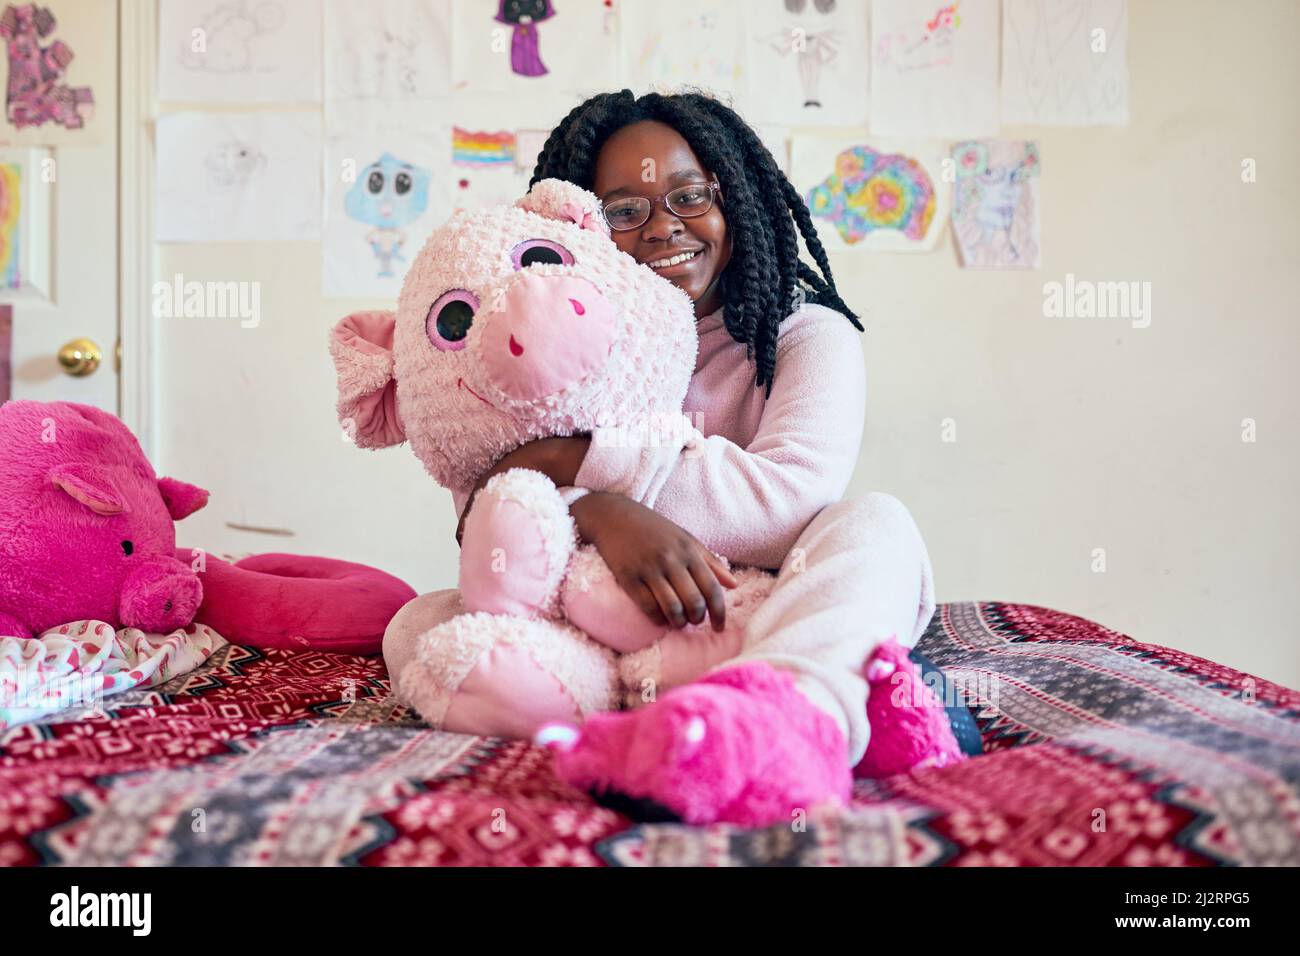 I cant sleep without my best friend. Portrait of an adorable little girl holding a plush toy while sitting on her bed in her bedroom. Stock Photo